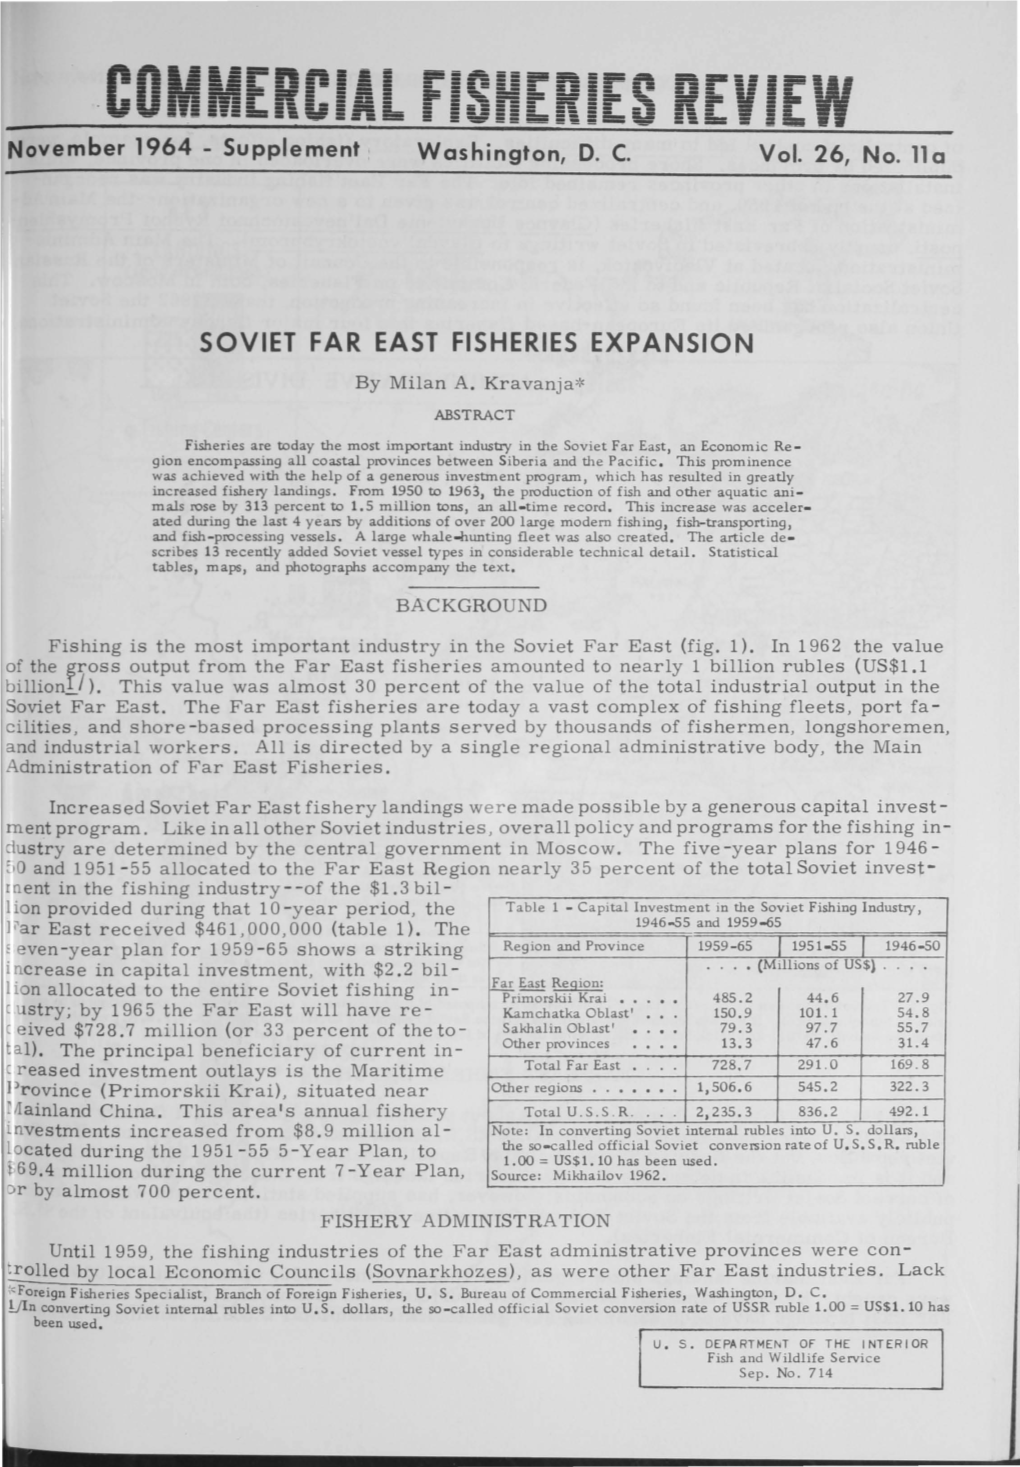 SOVIET FAR EAST FISHERIES EXPANSION by Milan A